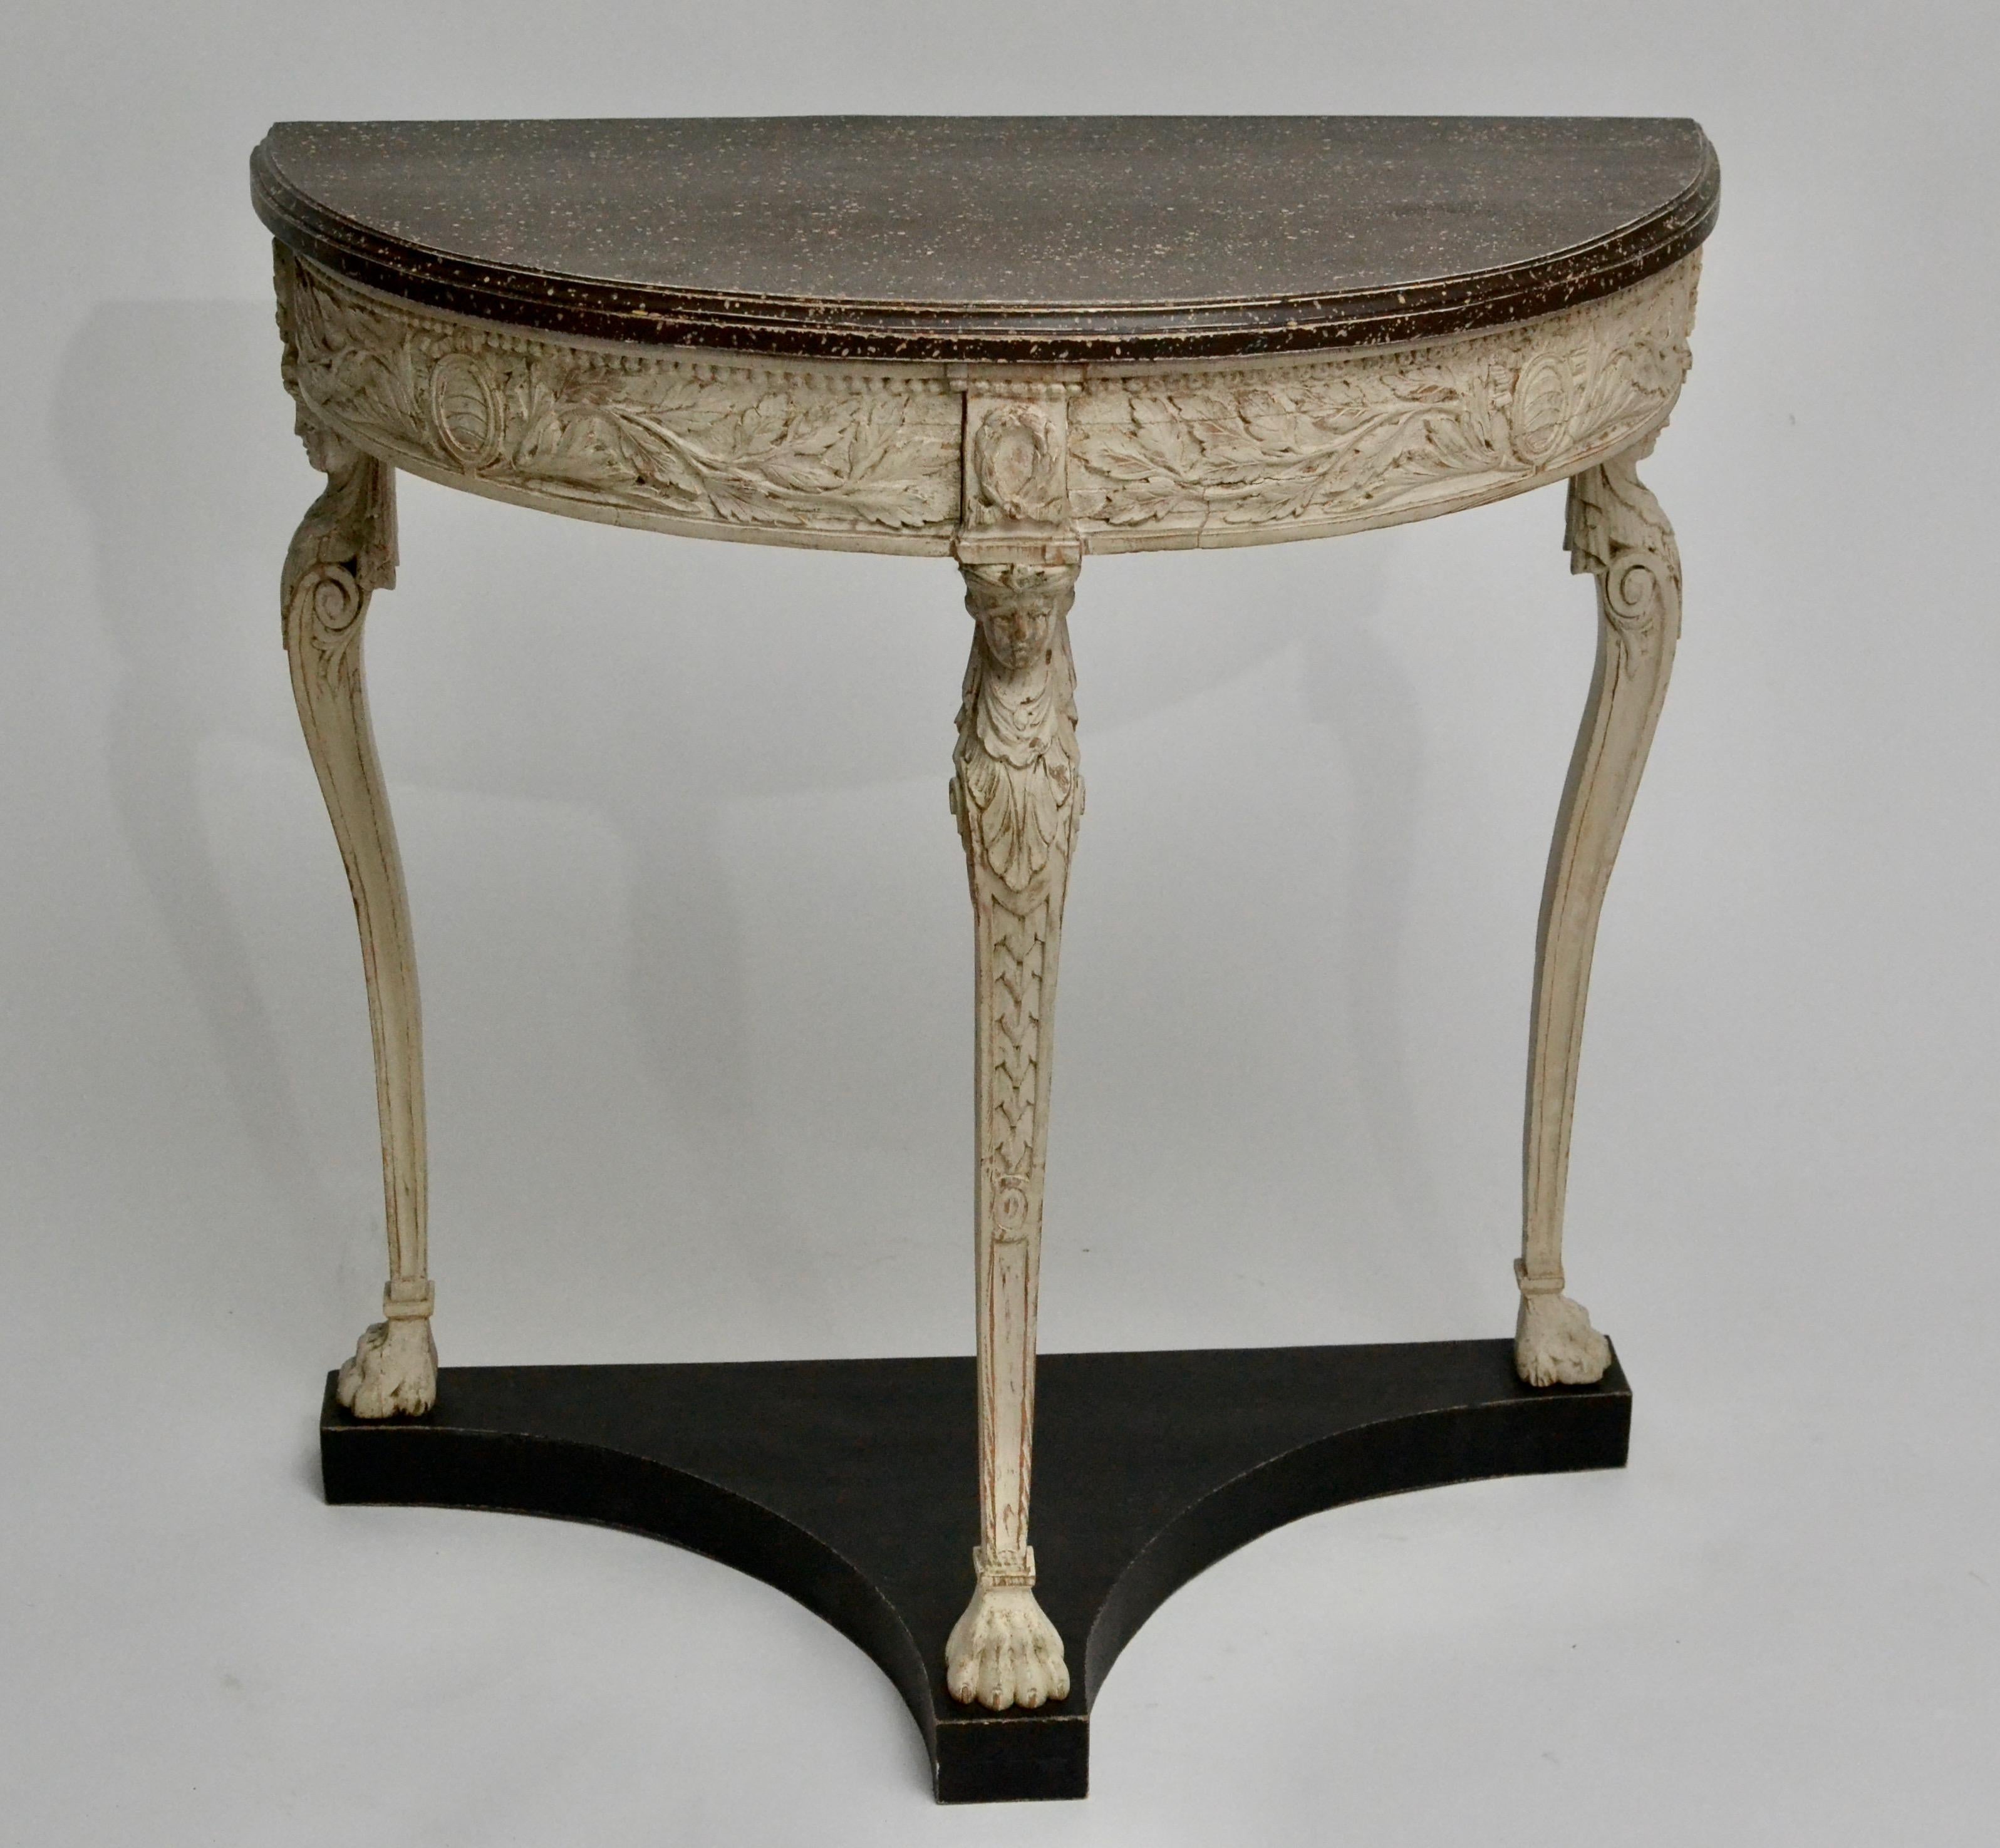 Swedish Gustavian Console Table with a Faux Porphyry Painted Top